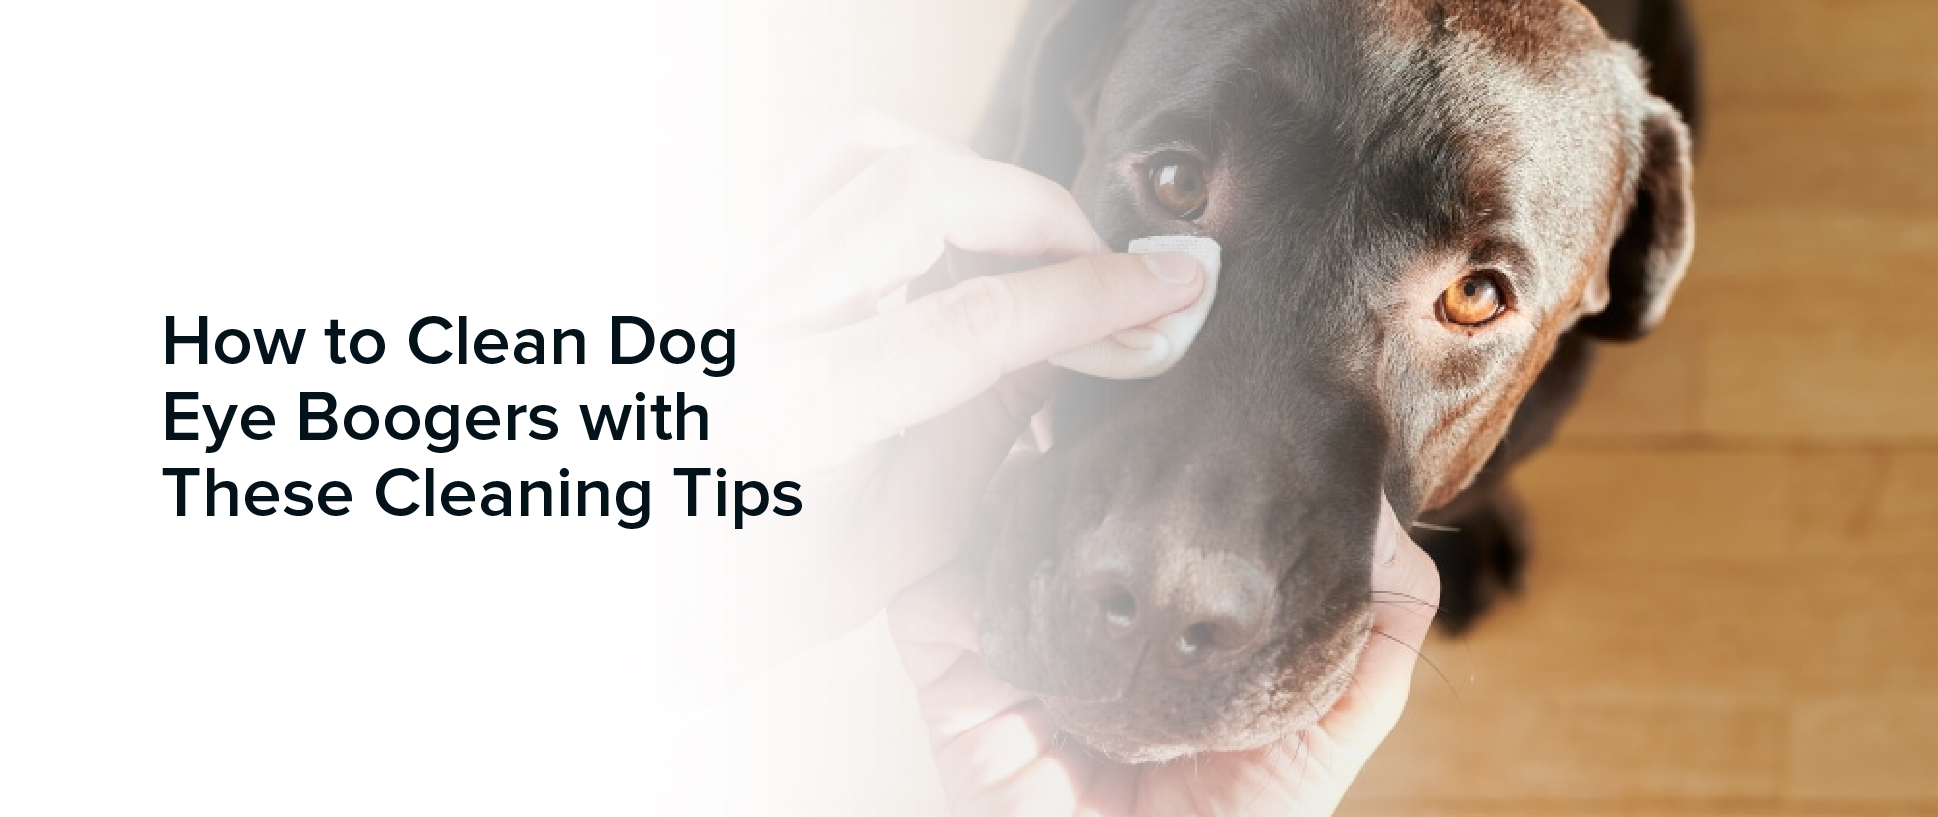 How to Clean Dog Eye Boogers with These Cleaning Tips